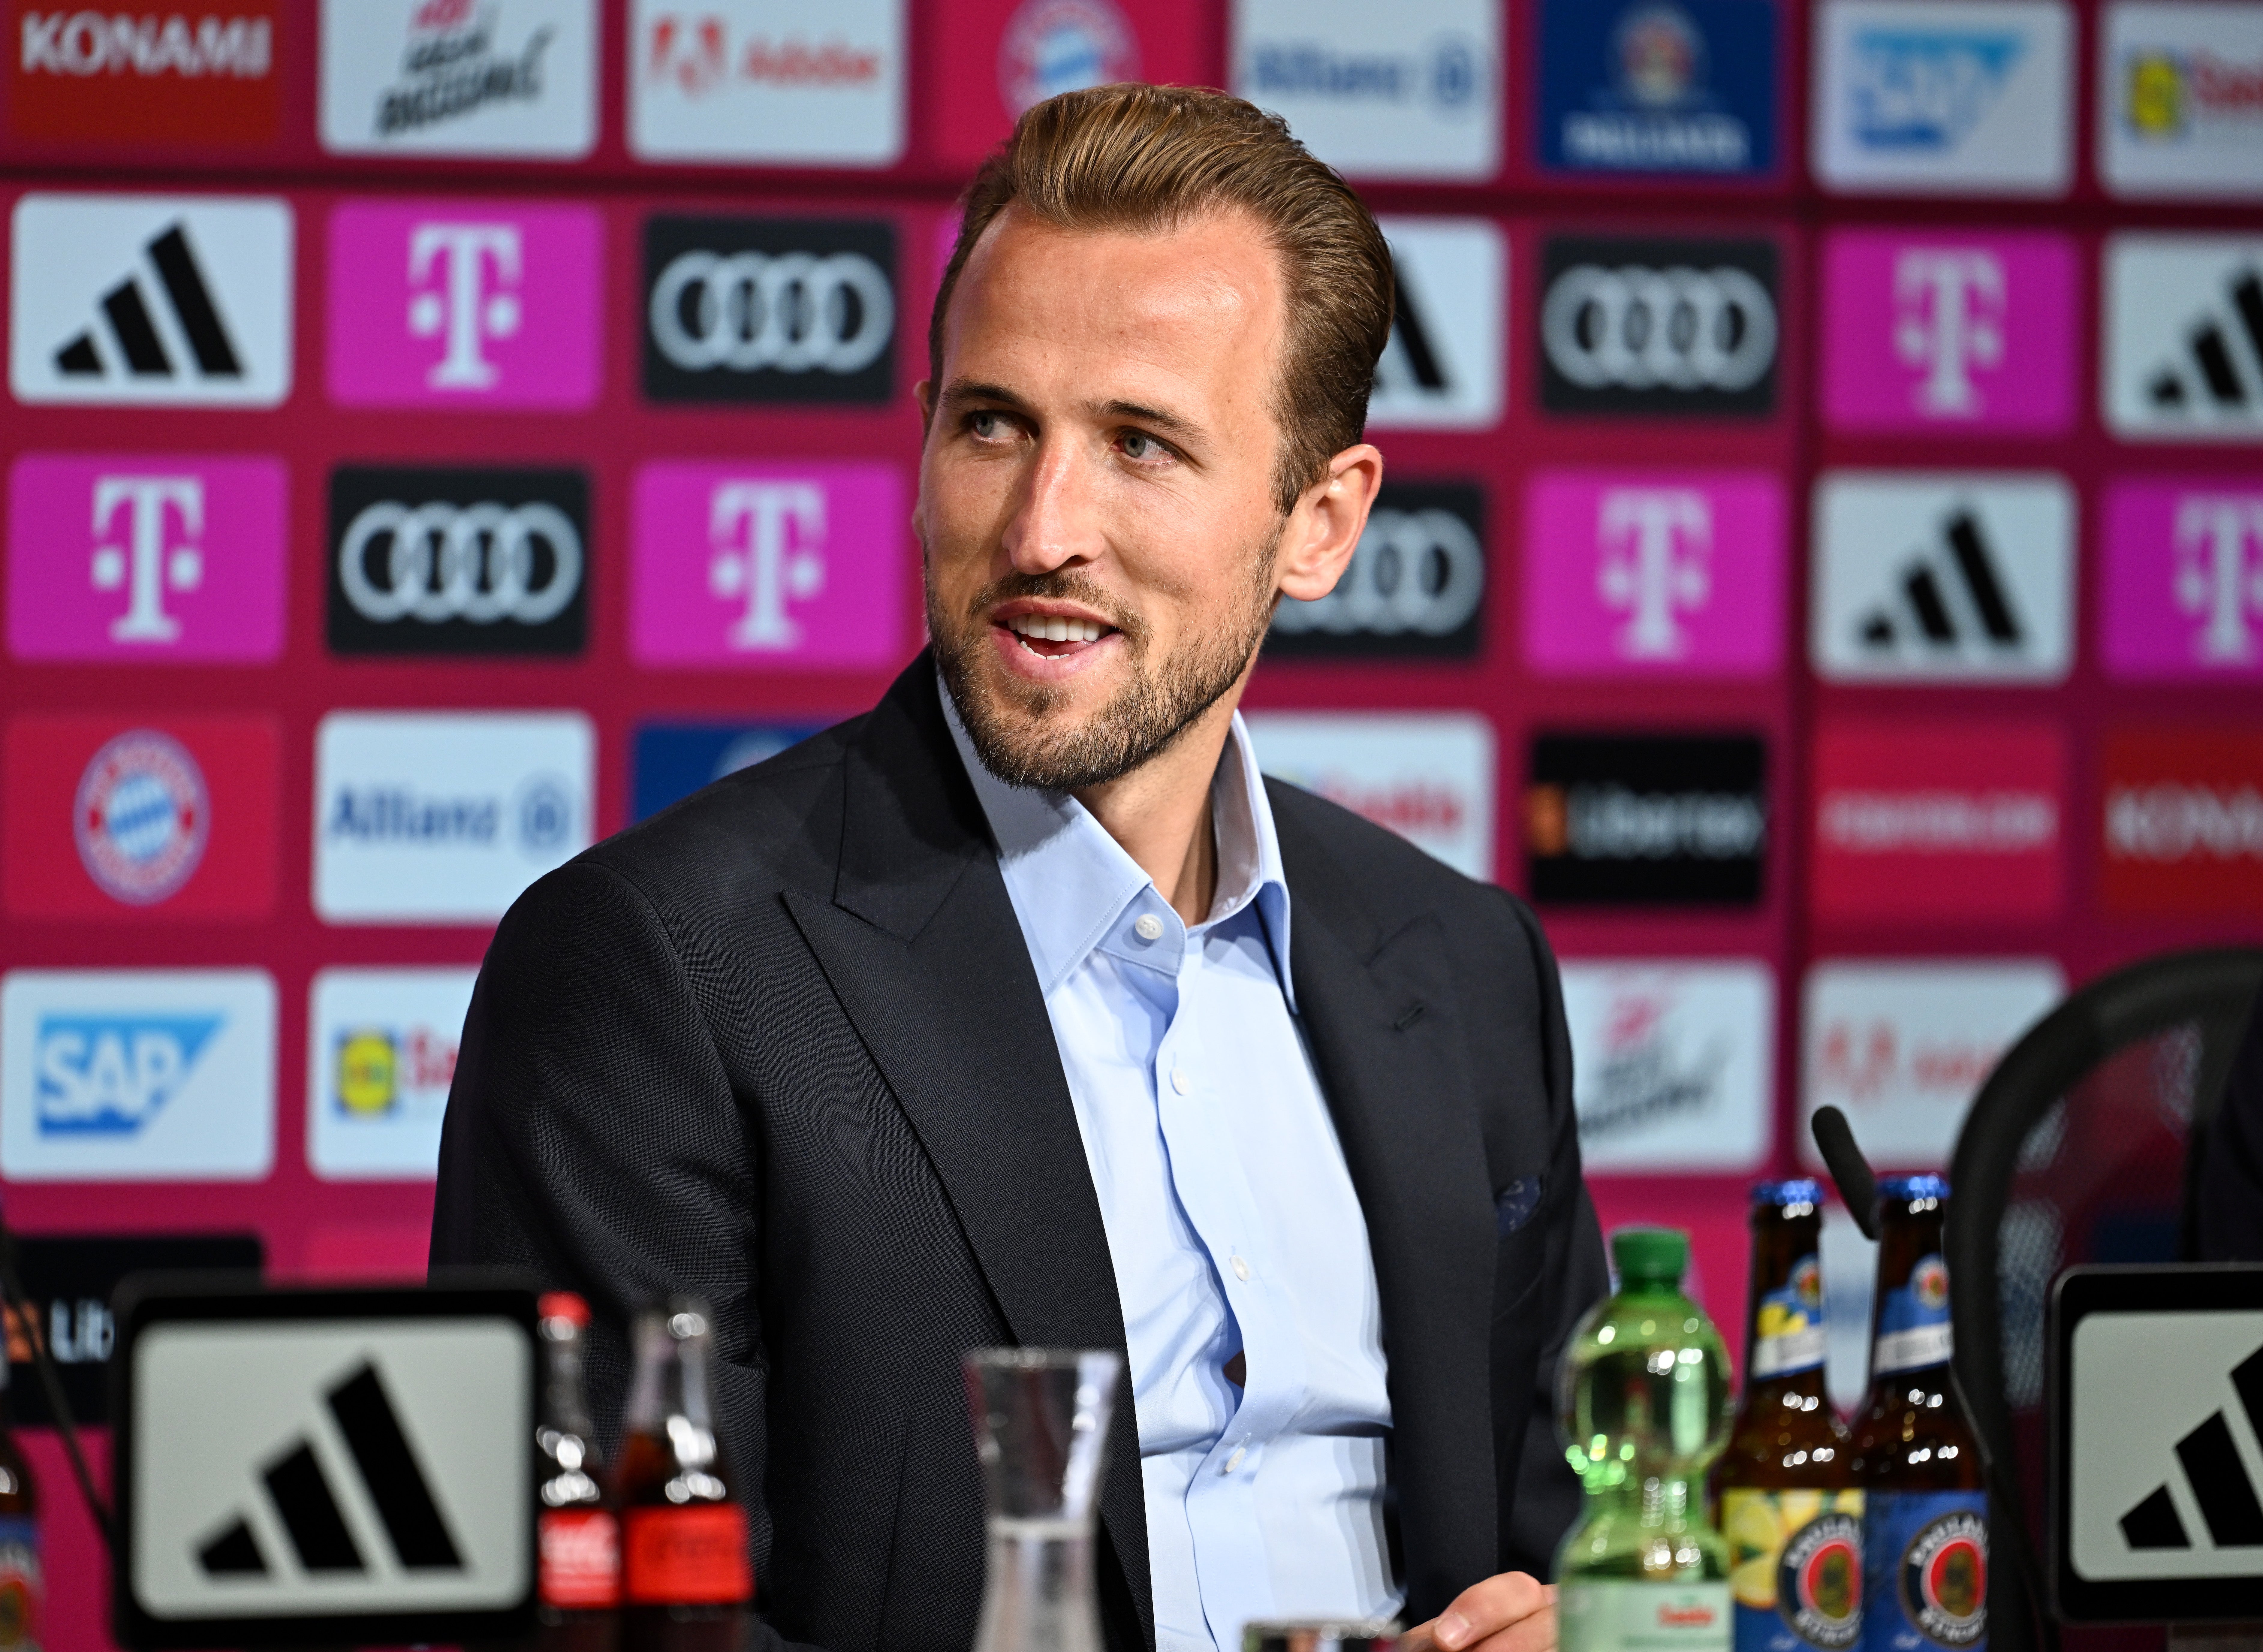 Harry Kane takes his first press conference as a new Bayern Munich player